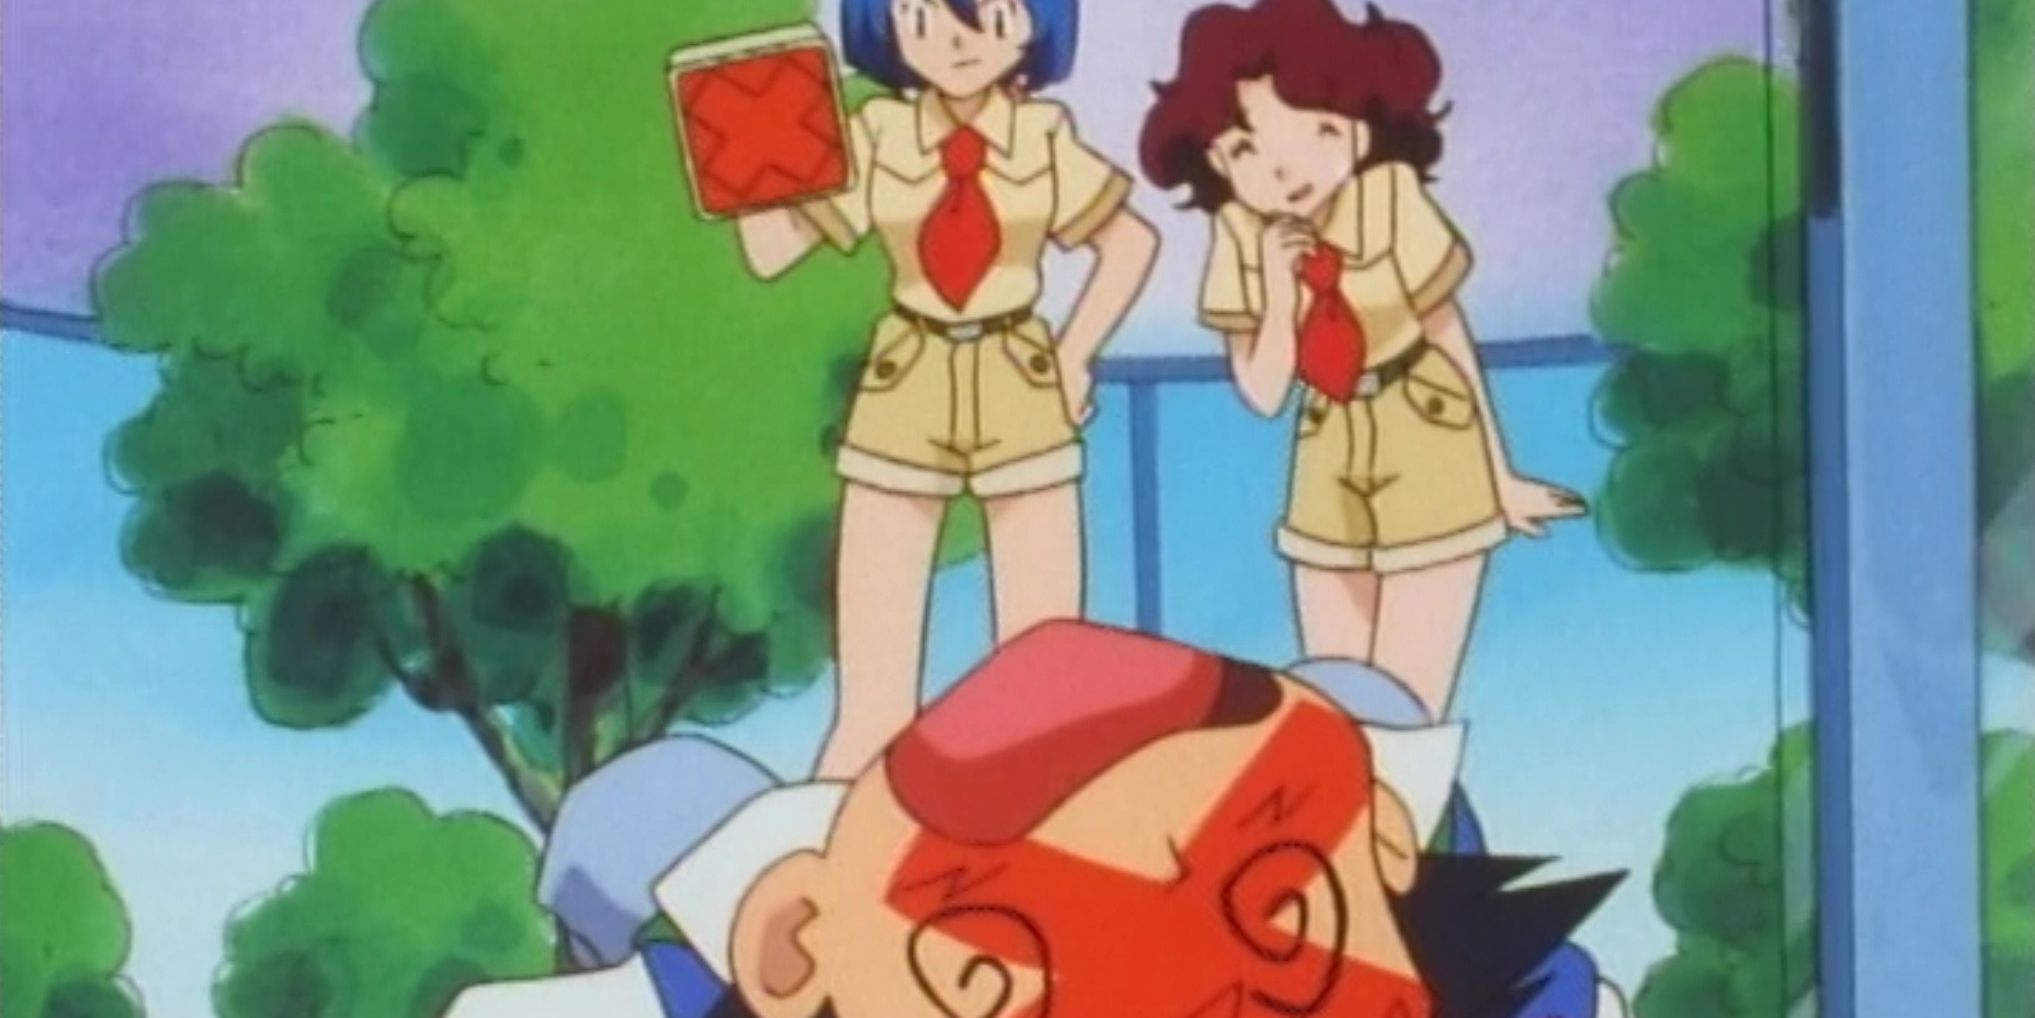 Ash being rejected from the Celadon Gym challenge in the anime